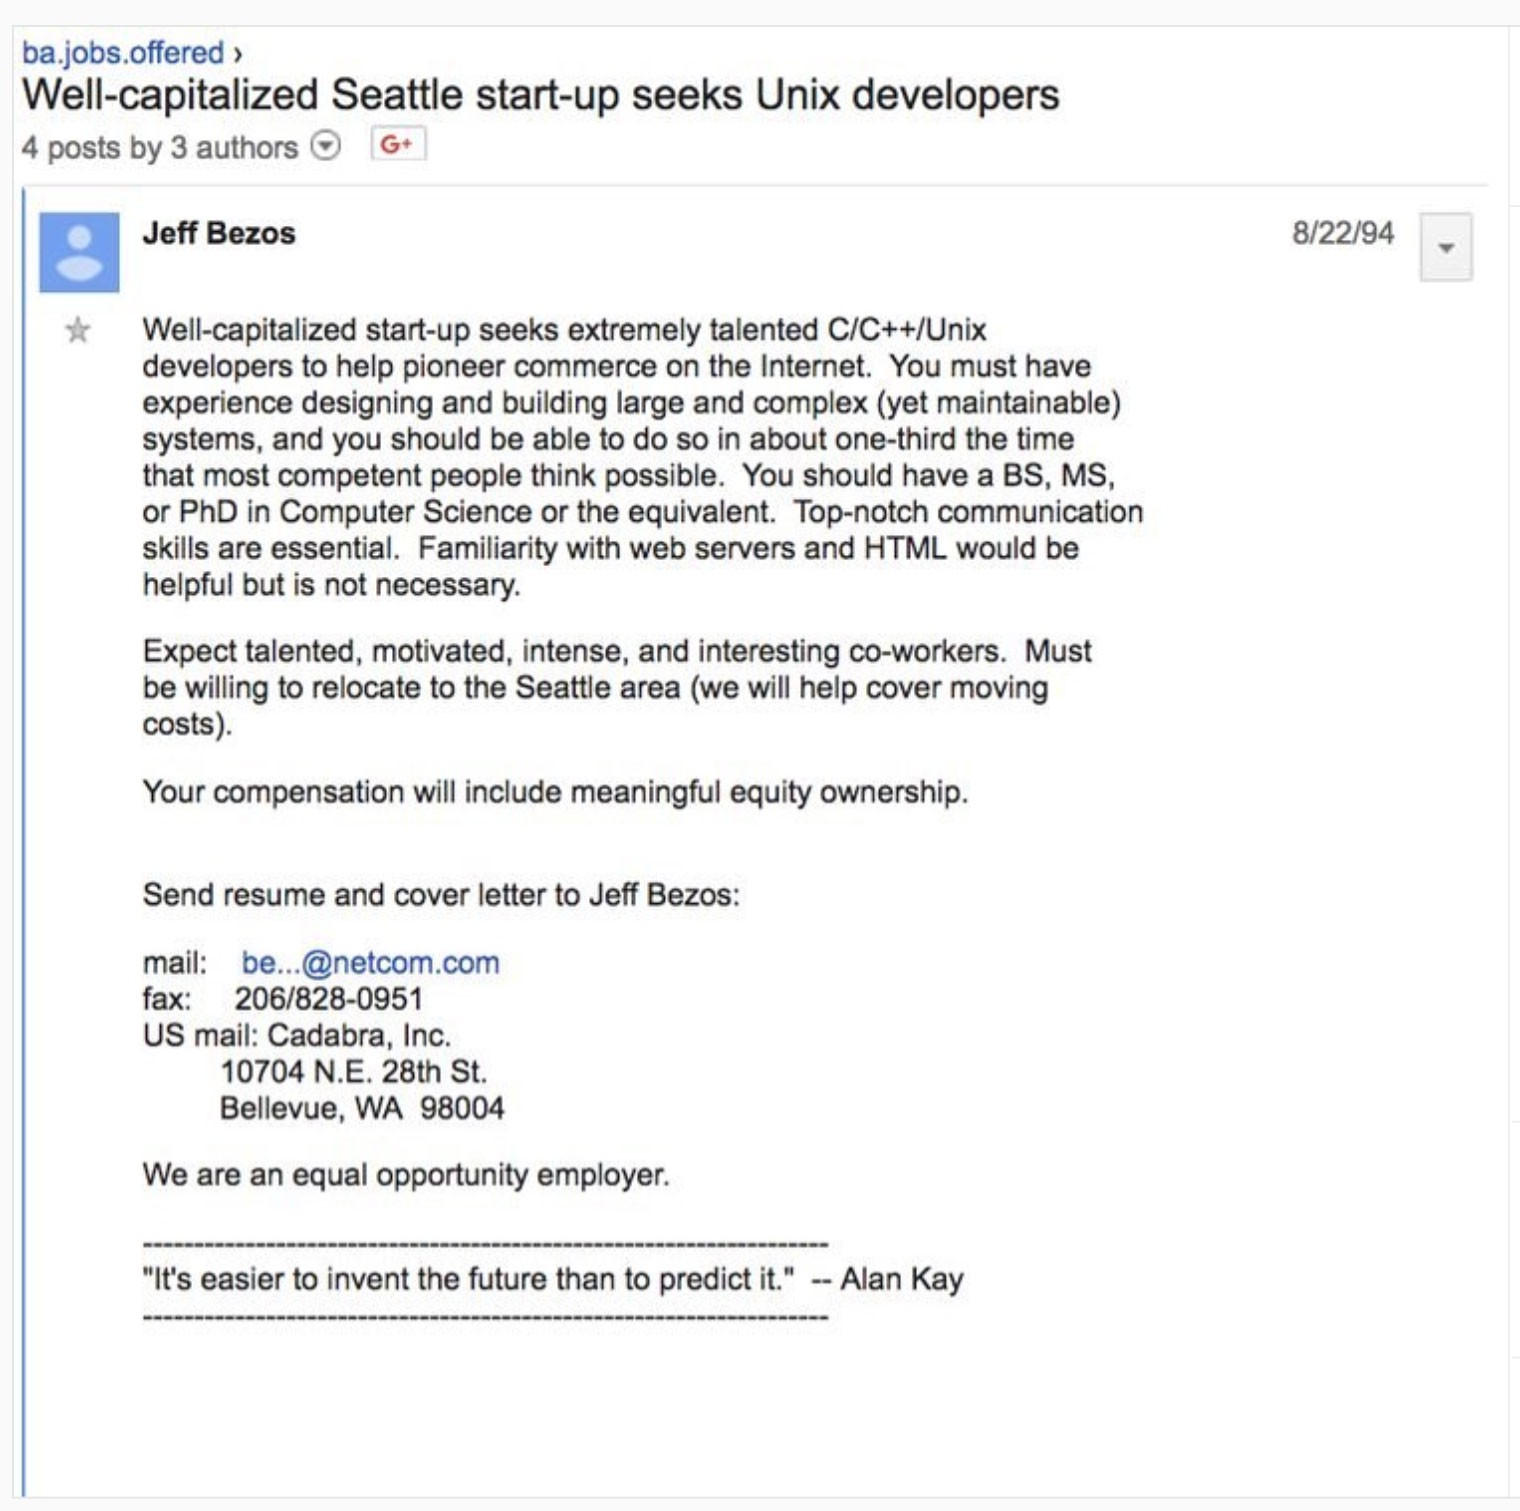 Screenshot of Jeff Bezos’ first job ad for Amazon:  Title: Well-capitalized Seattle start-up seeks Unix developers. Jeff Bezos - 8/22/94  Well-capitalized start-up seeks extremely talented C/C++/Unix developers to help pioneer commerce on the Internet. You must have experience designing and building large and complex (yet maintainable) systems, and you should are able to do so in about one-third the time that most competent people think possible. You should have a BS, MS, or PhD in Computer Science or the equivalent. Top-notch communication skills are essential. Familiarity with web servers and HTML would be helpful but is not necessary.  Expect talented, motivated, intense, and interesting co-workers. Must be willing to relocate to the Seattle area (we will help cover moving costs).  Your compensation will include meaningful equity ownership.  Send resume and cover letter to Jeff Bezos:  Mail: be…@netcom.com Fax: 206/828-0951 US Mail: Cadbra, Inc, 10704 N.E. 28th St, Bellevue, WA 98004  We are an equal opportunity employer.  “It’s easier to invent the future than to predict it.” —Alan Kay